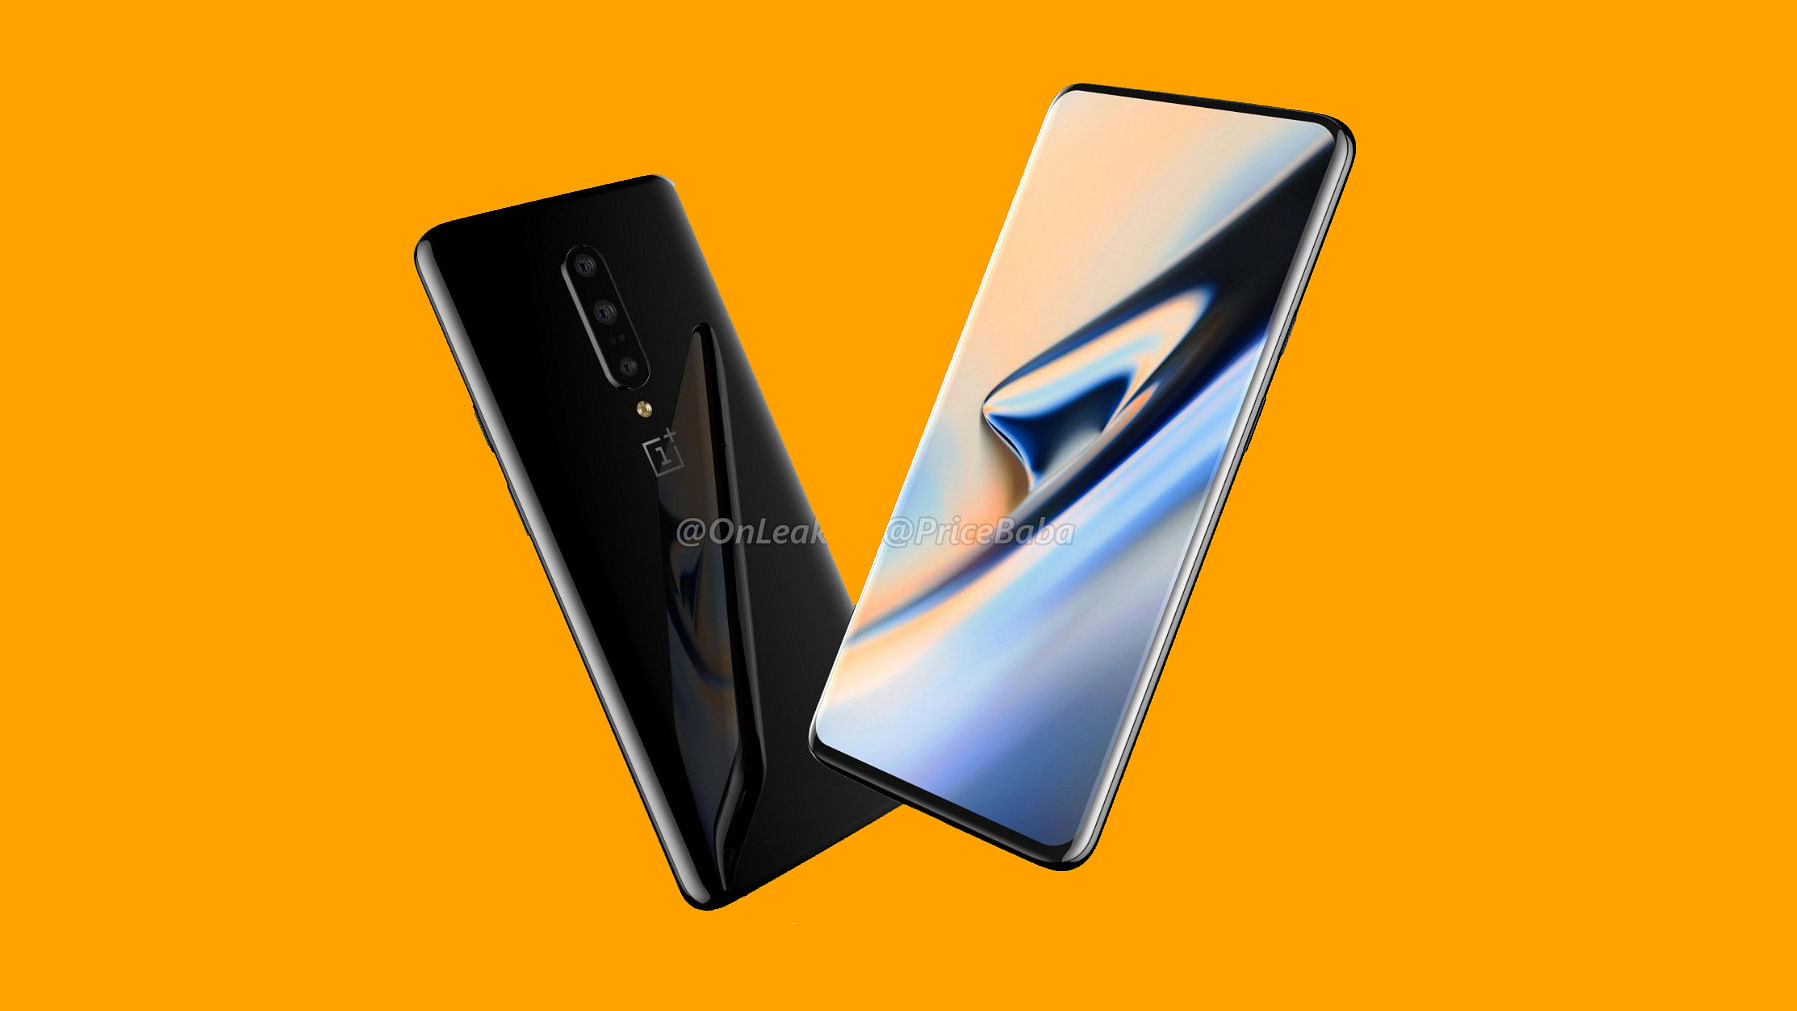 Could this leaked photo of OnePlus 7 Pro be the real deal?